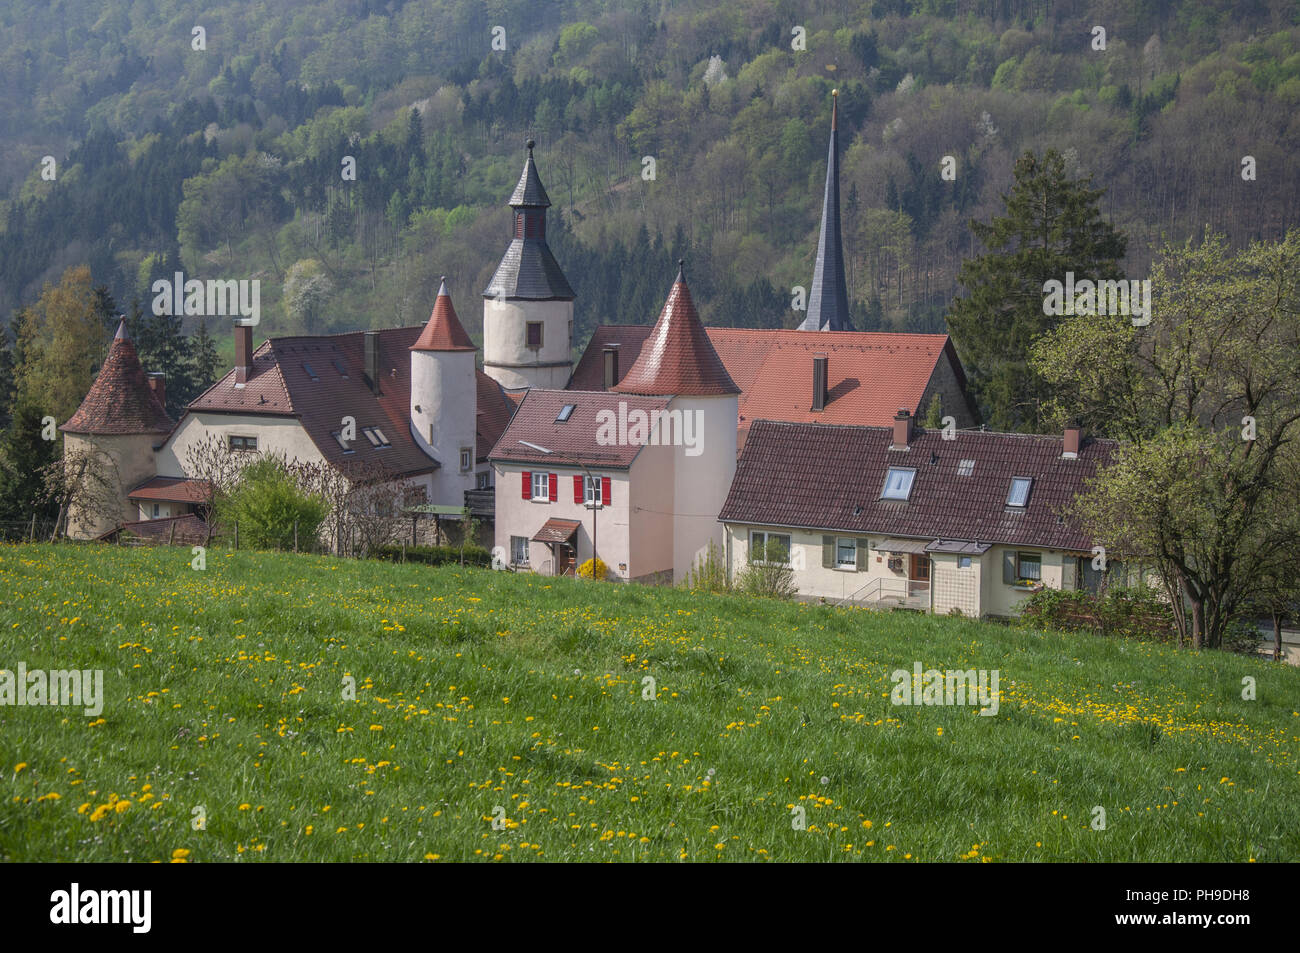 Castle Braunsbach in the Kocher valley, Germany Stock Photo